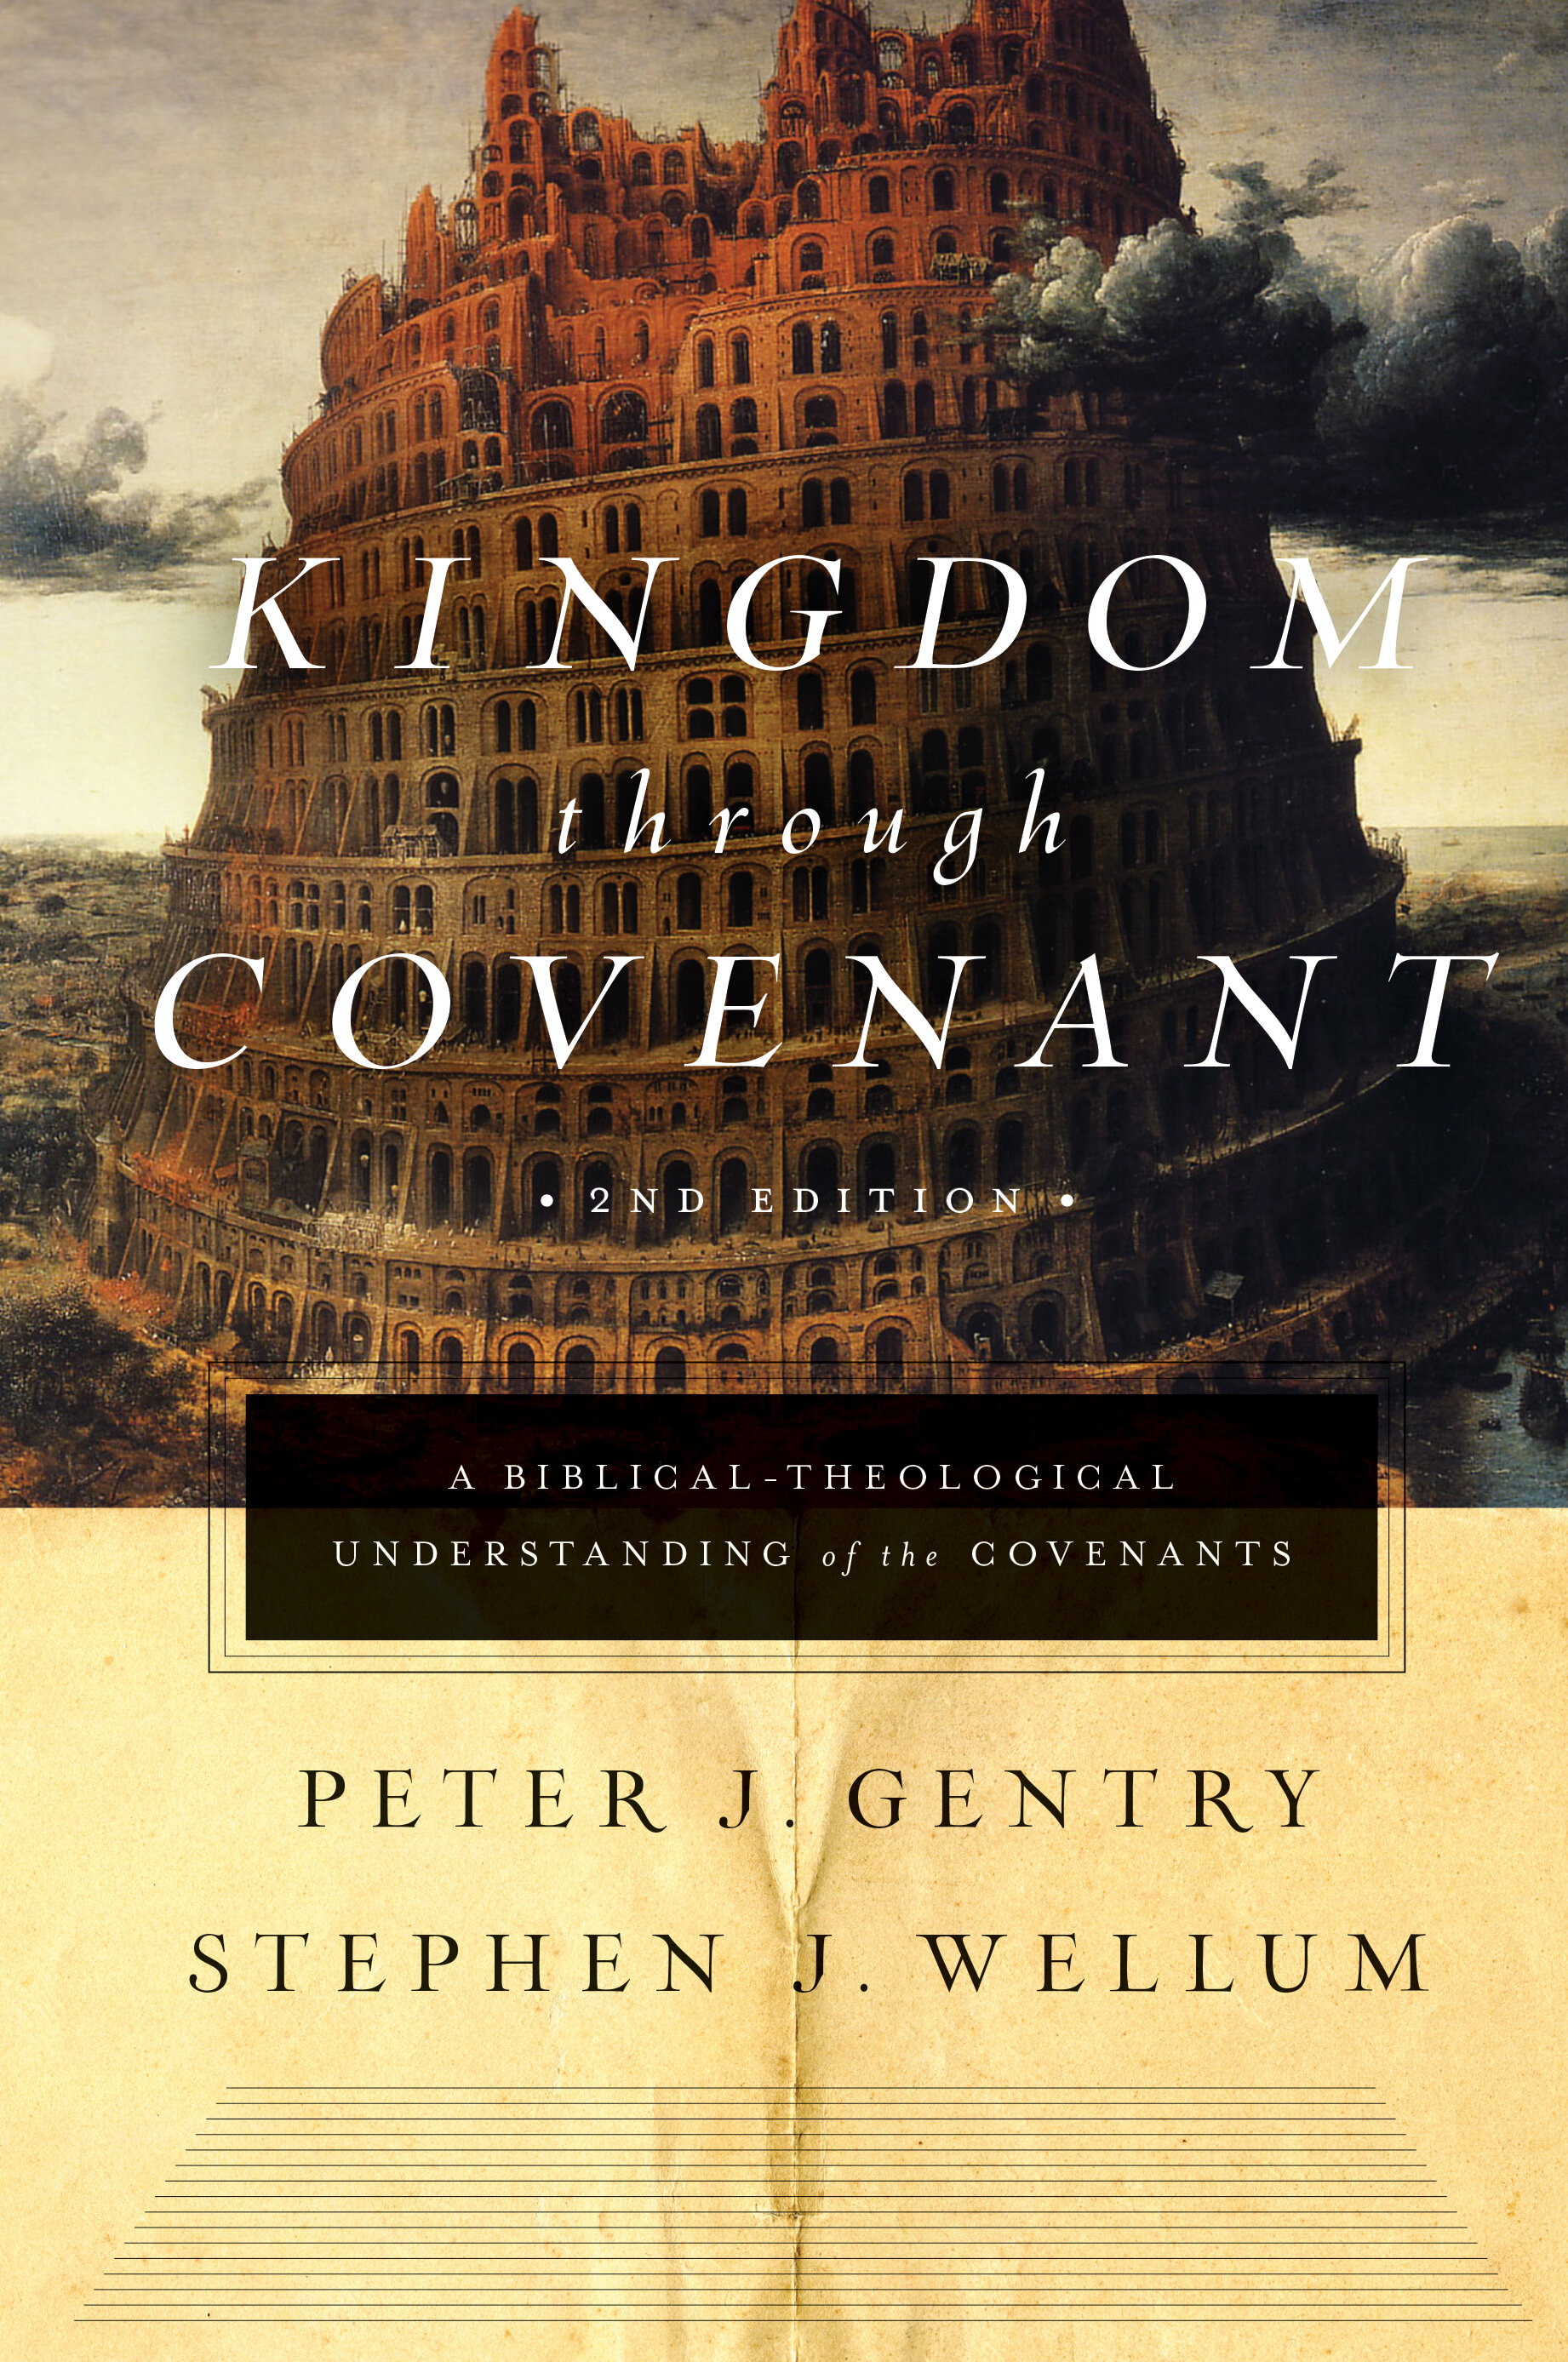 Kingdom through Covenant: A Biblical-Theological Understanding of the Covenants, 2nd ed.